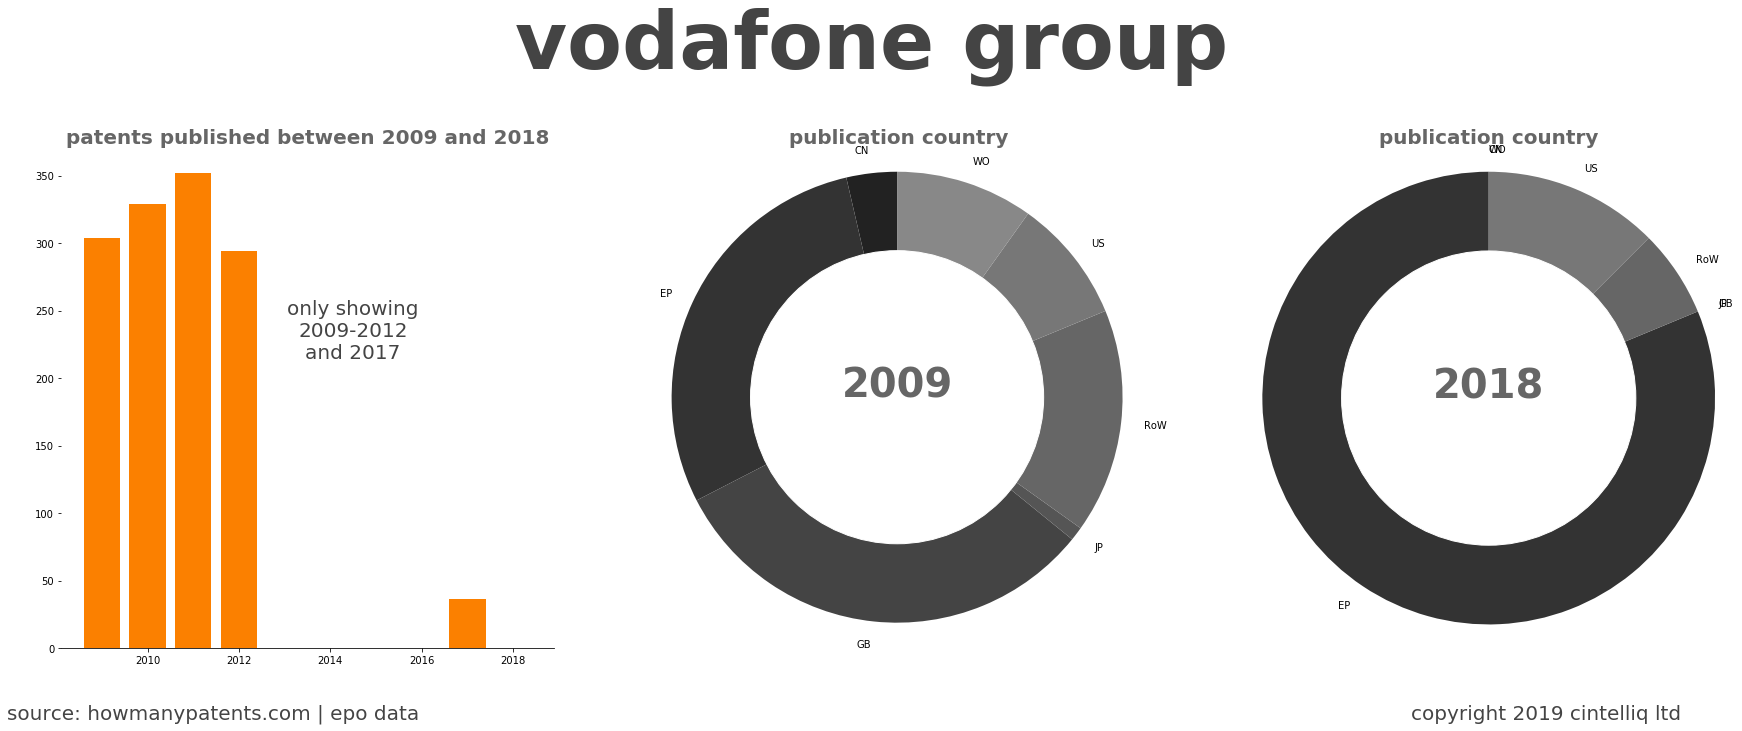 summary of patents for Vodafone Group